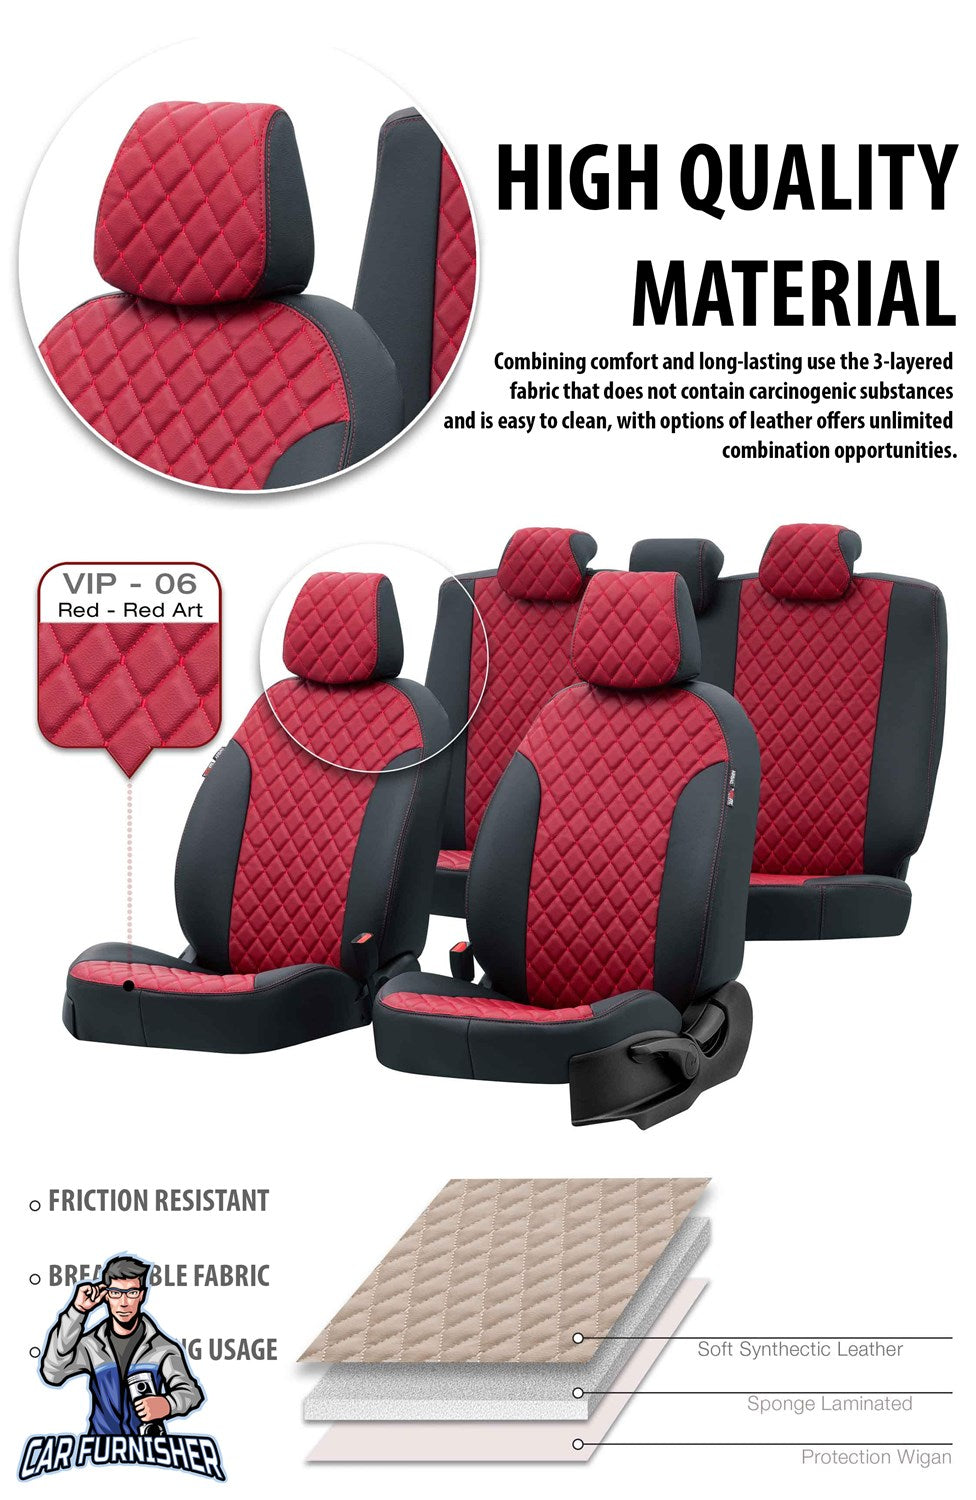 Toyota Prius Seat Cover Madrid Leather Design Smoked Leather